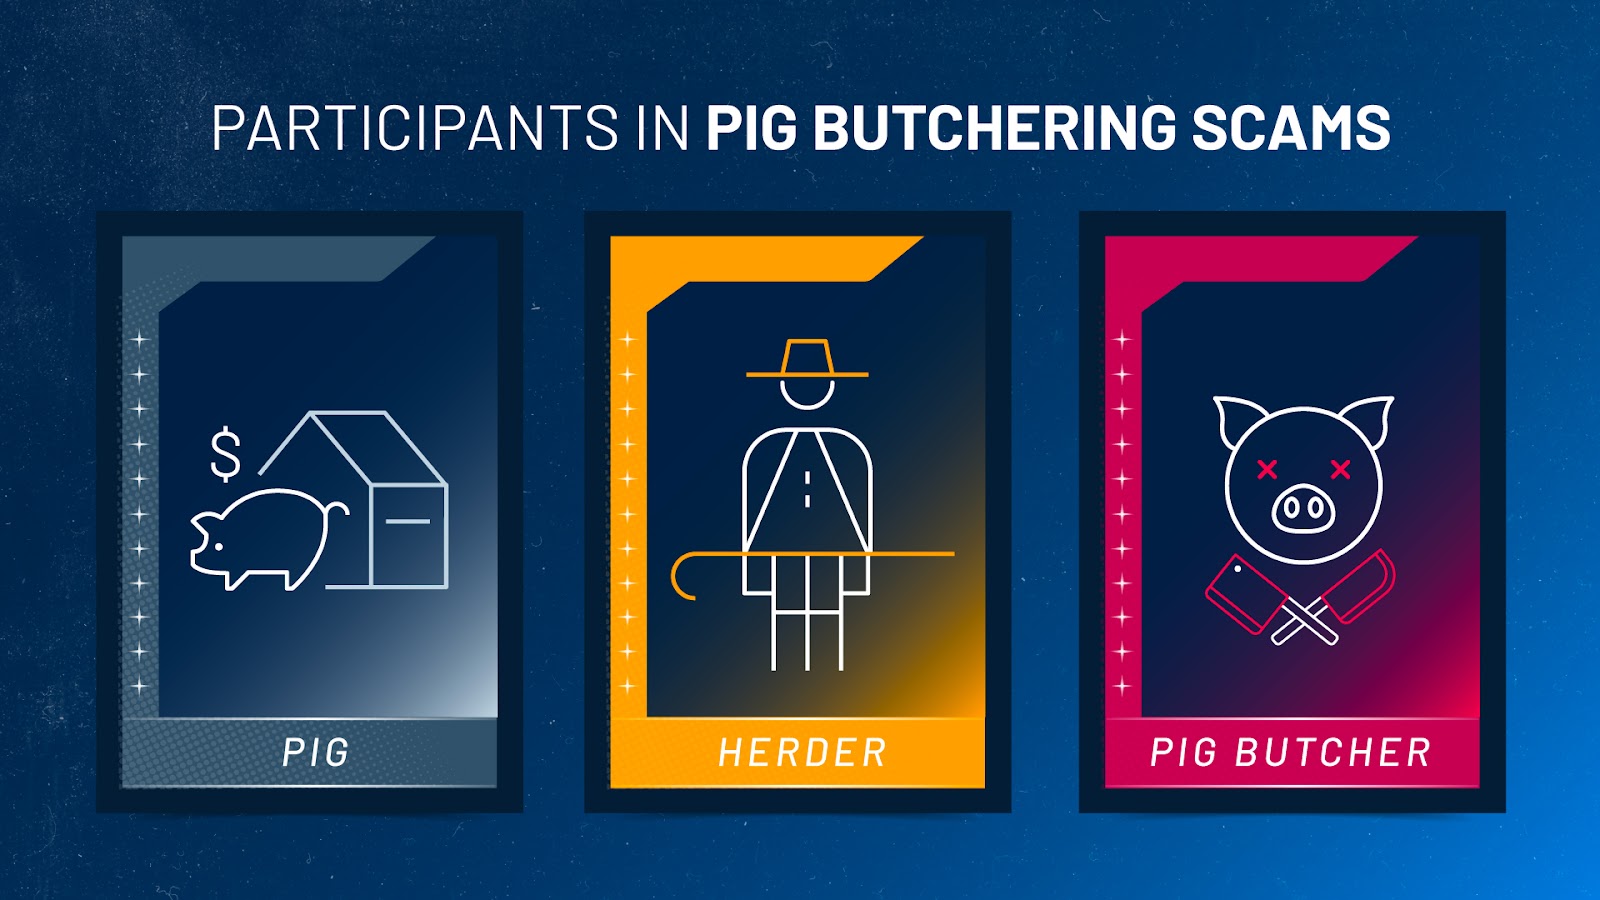 A list of participants in pig butchering scams including the pig (the victim), the herder (pushes users off platforms to traditional messaging services) and the pig butcher (the party responsible for conducting a long con scam to steal money from pigs)